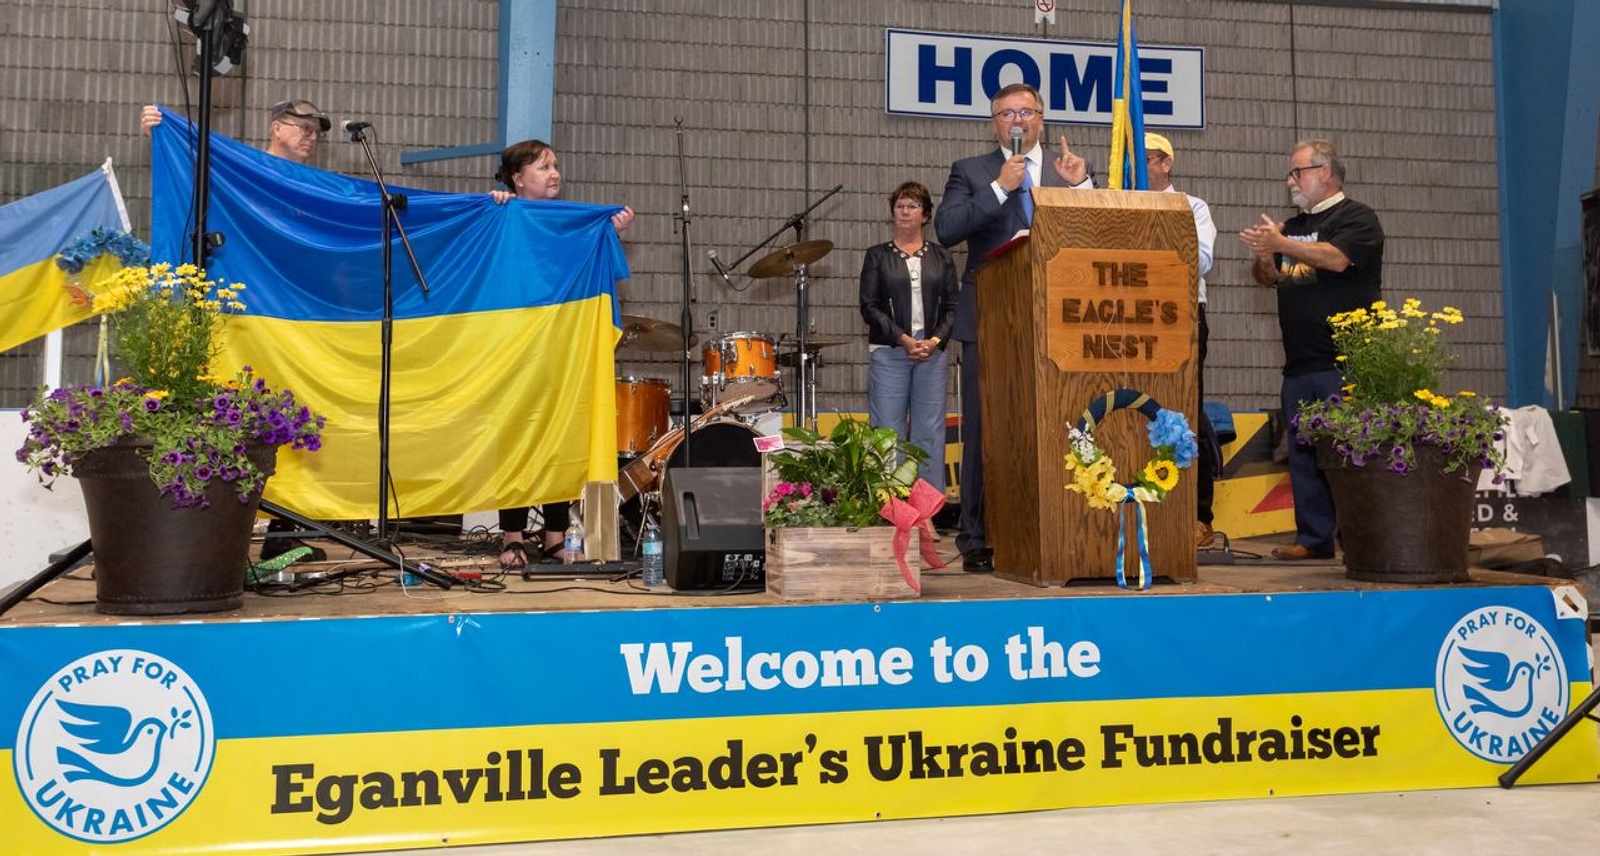 Residents of Egenville, Canada, Raised CAD 90,000 via UNITED24 for the Medical Needs of Ukraine